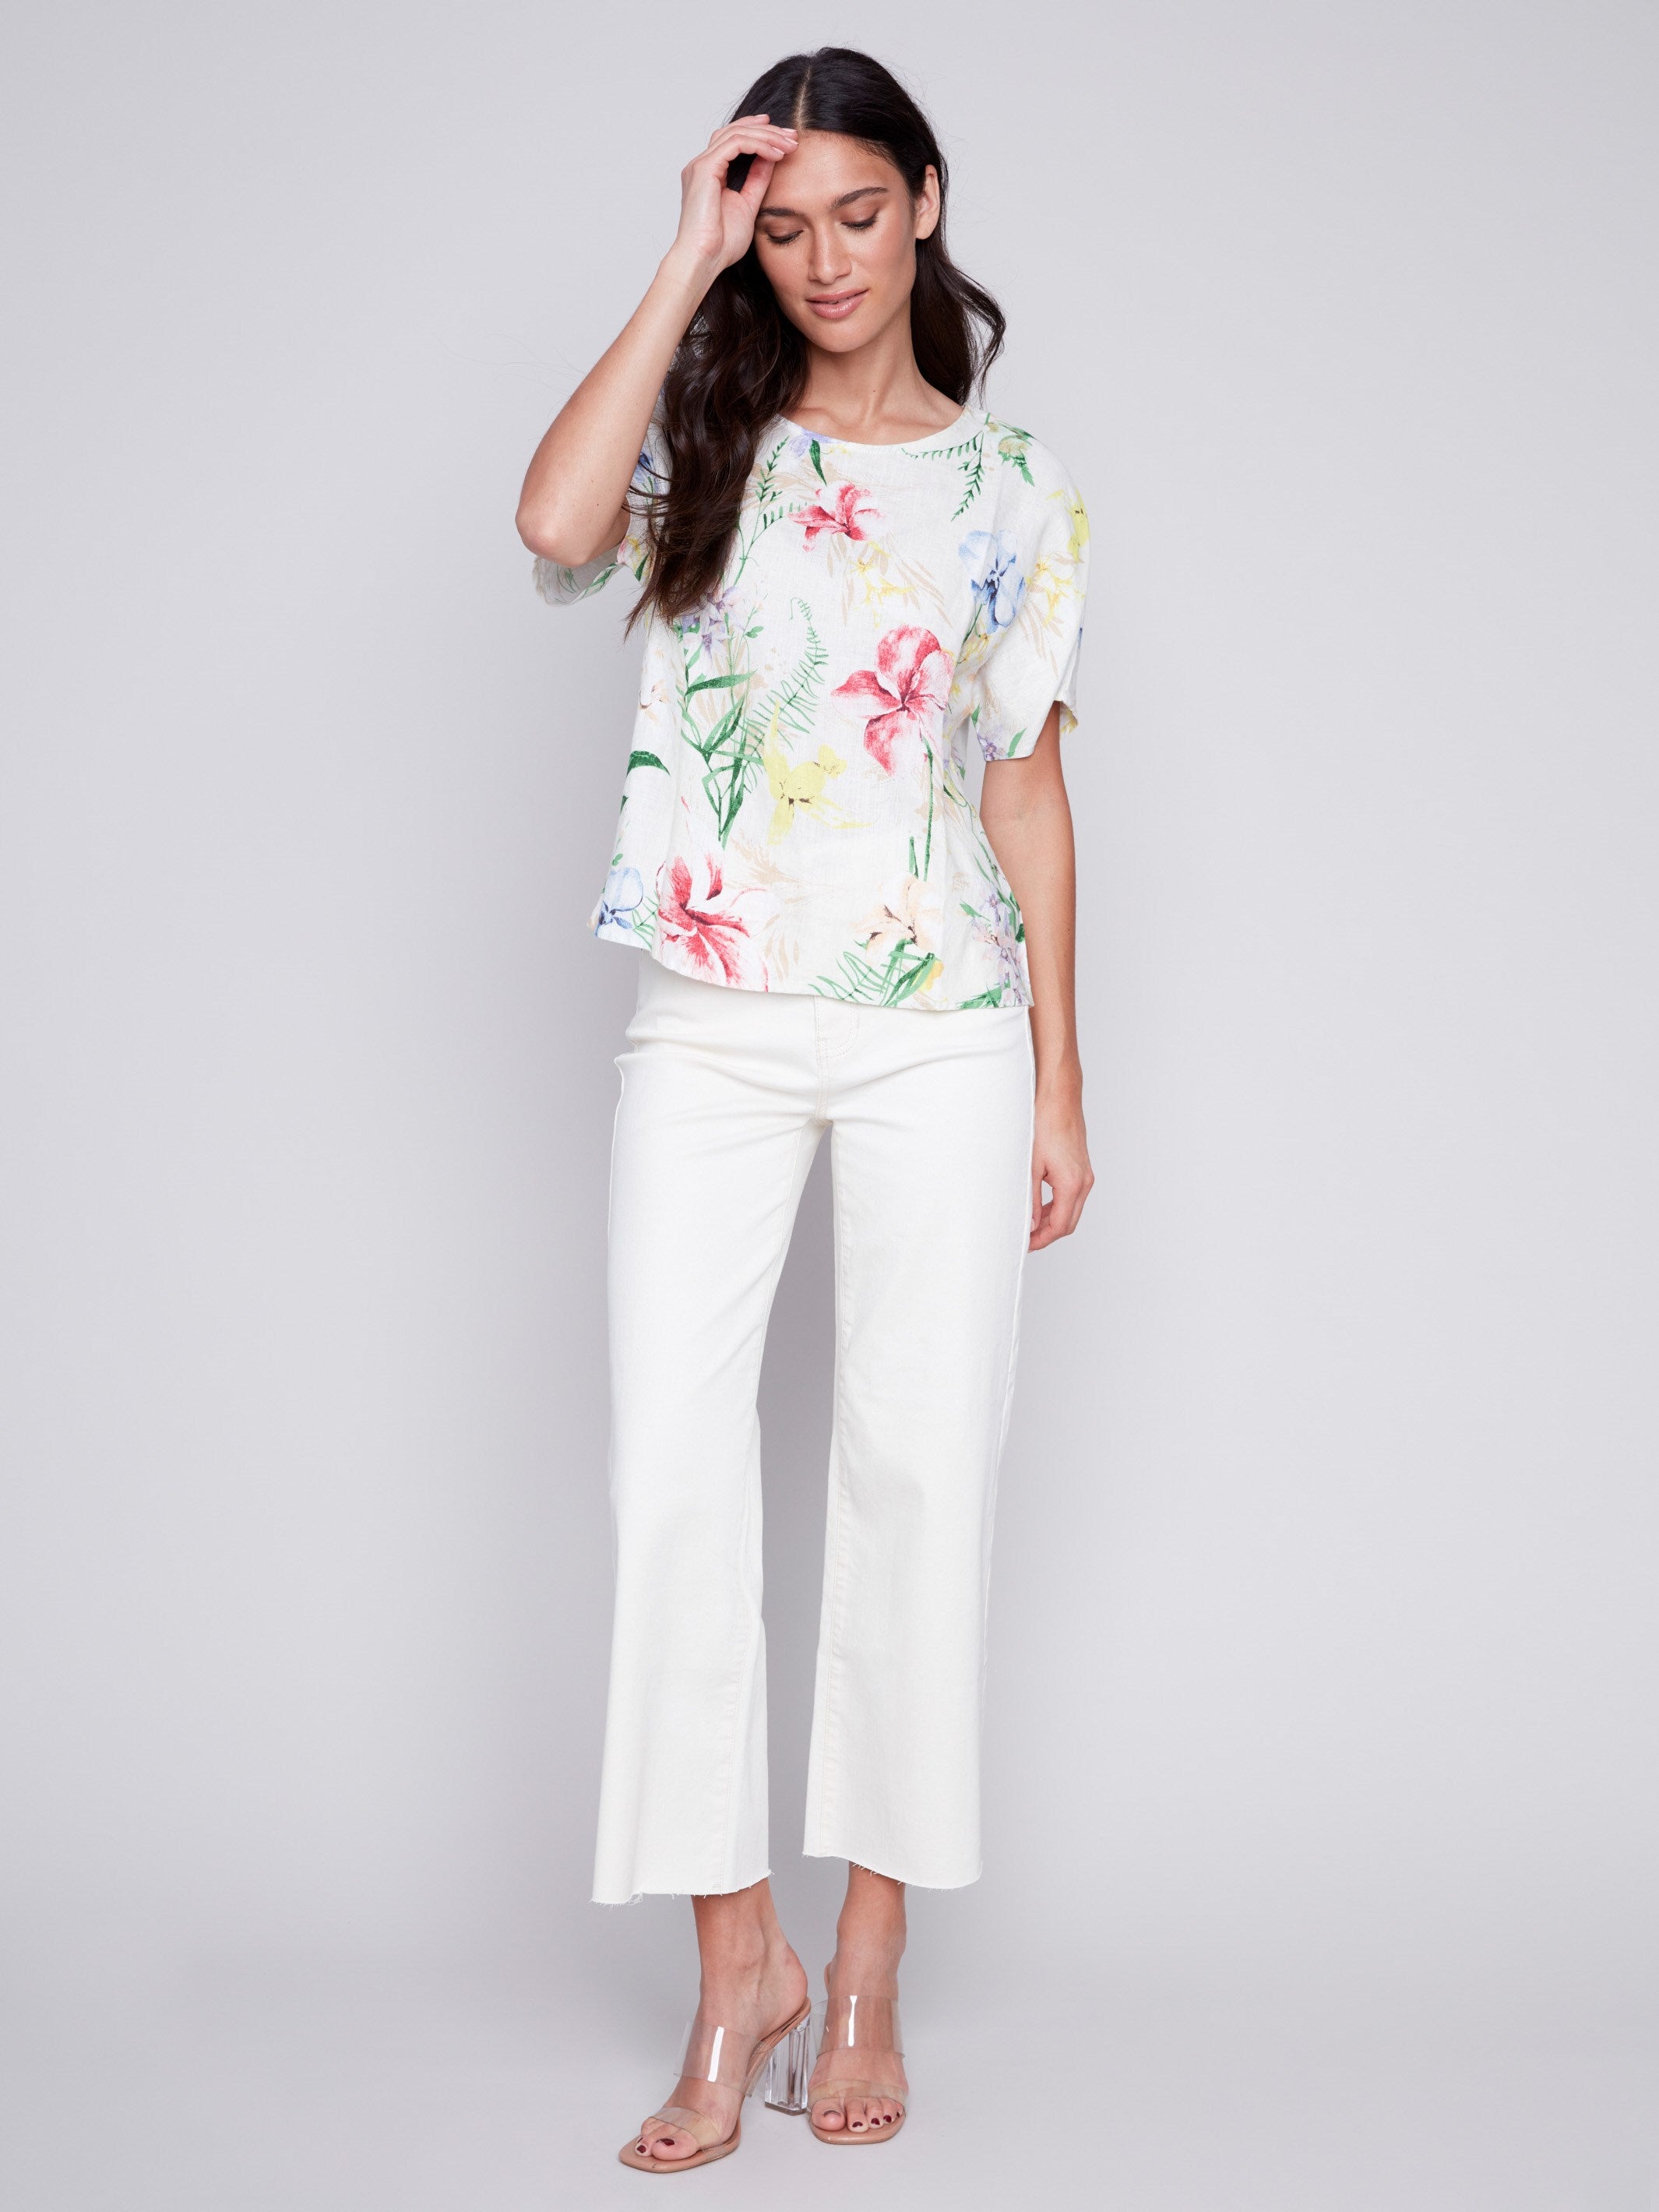 Printed Linen Dolman Top - Wildflower - Charlie B Collection Canada - Image 4